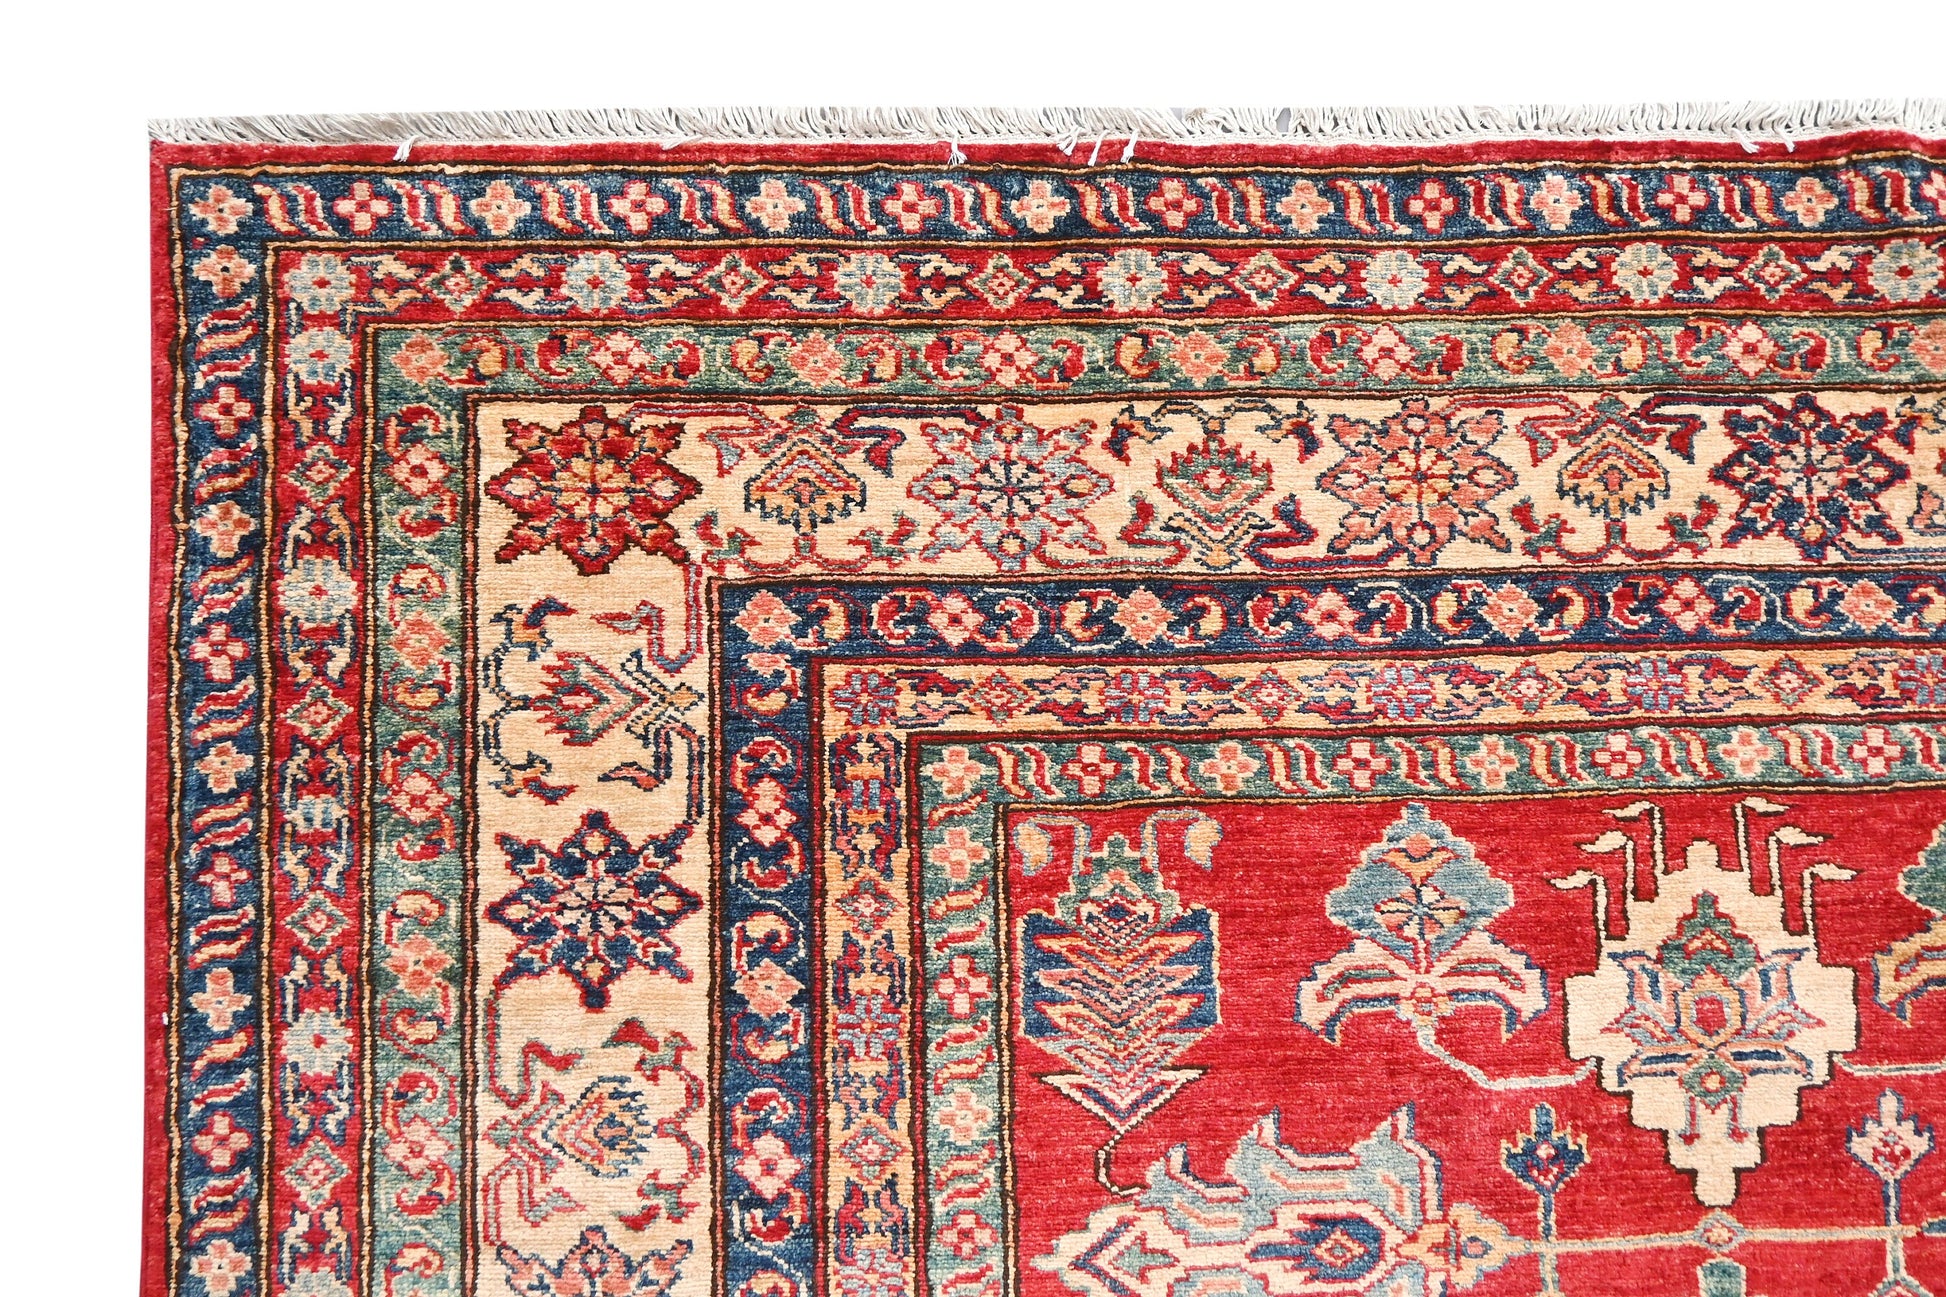 Kazakh Carpet | 10'3" x 8'2" | Home Decor | Hand-knotted Wool Area Rug